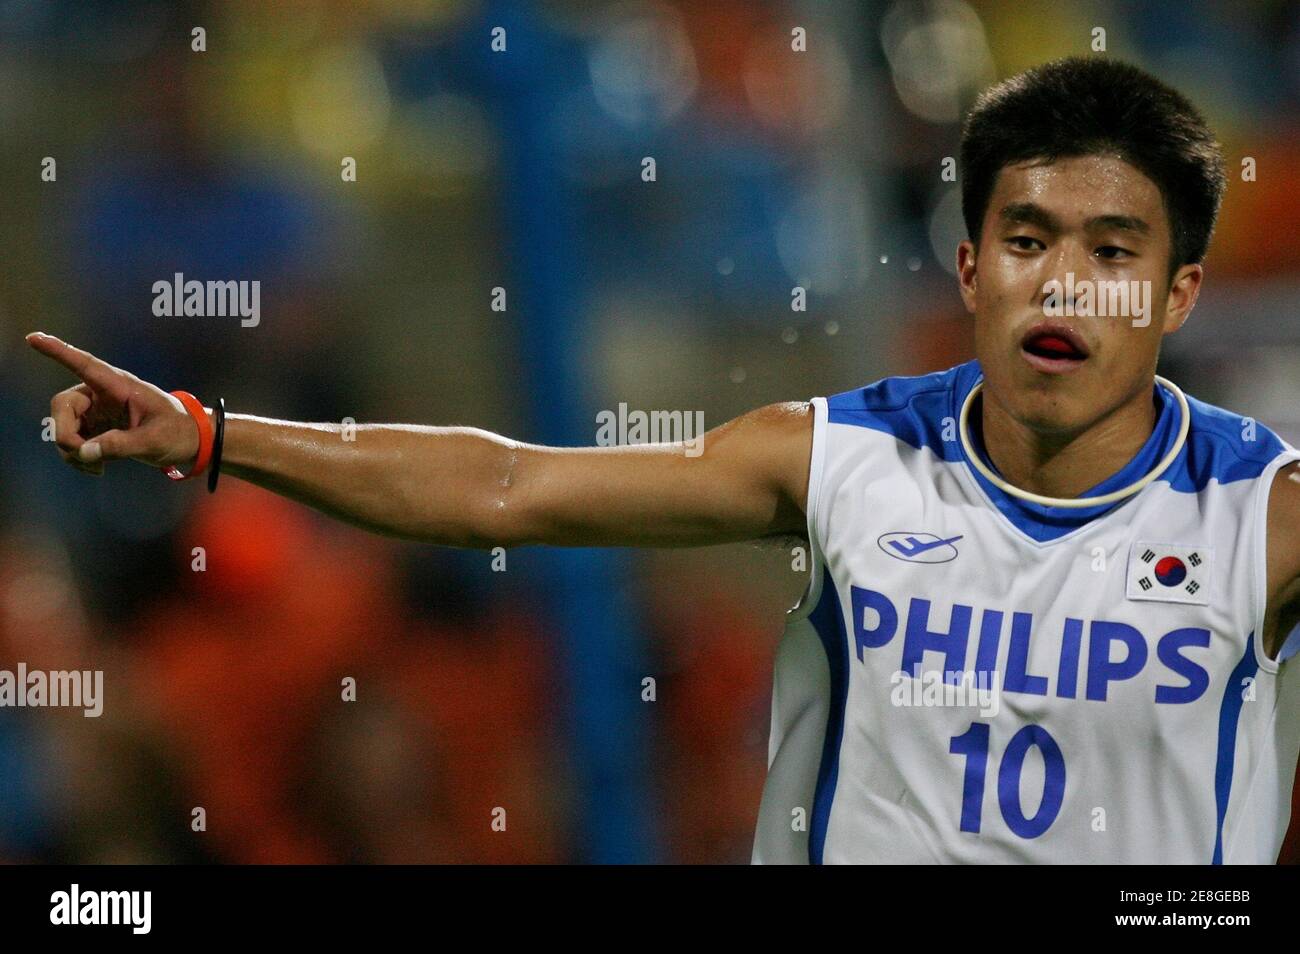 South Korea's Hoy Sik You celebrates after scoring against the Netherlands during their Men's Field Hockey World Cup match at the Warsteiner Hockey Park stadium in Moenchengladbach September 6, 2006. REUTERS/Pascal Lauener  (GERMANY) Stock Photo